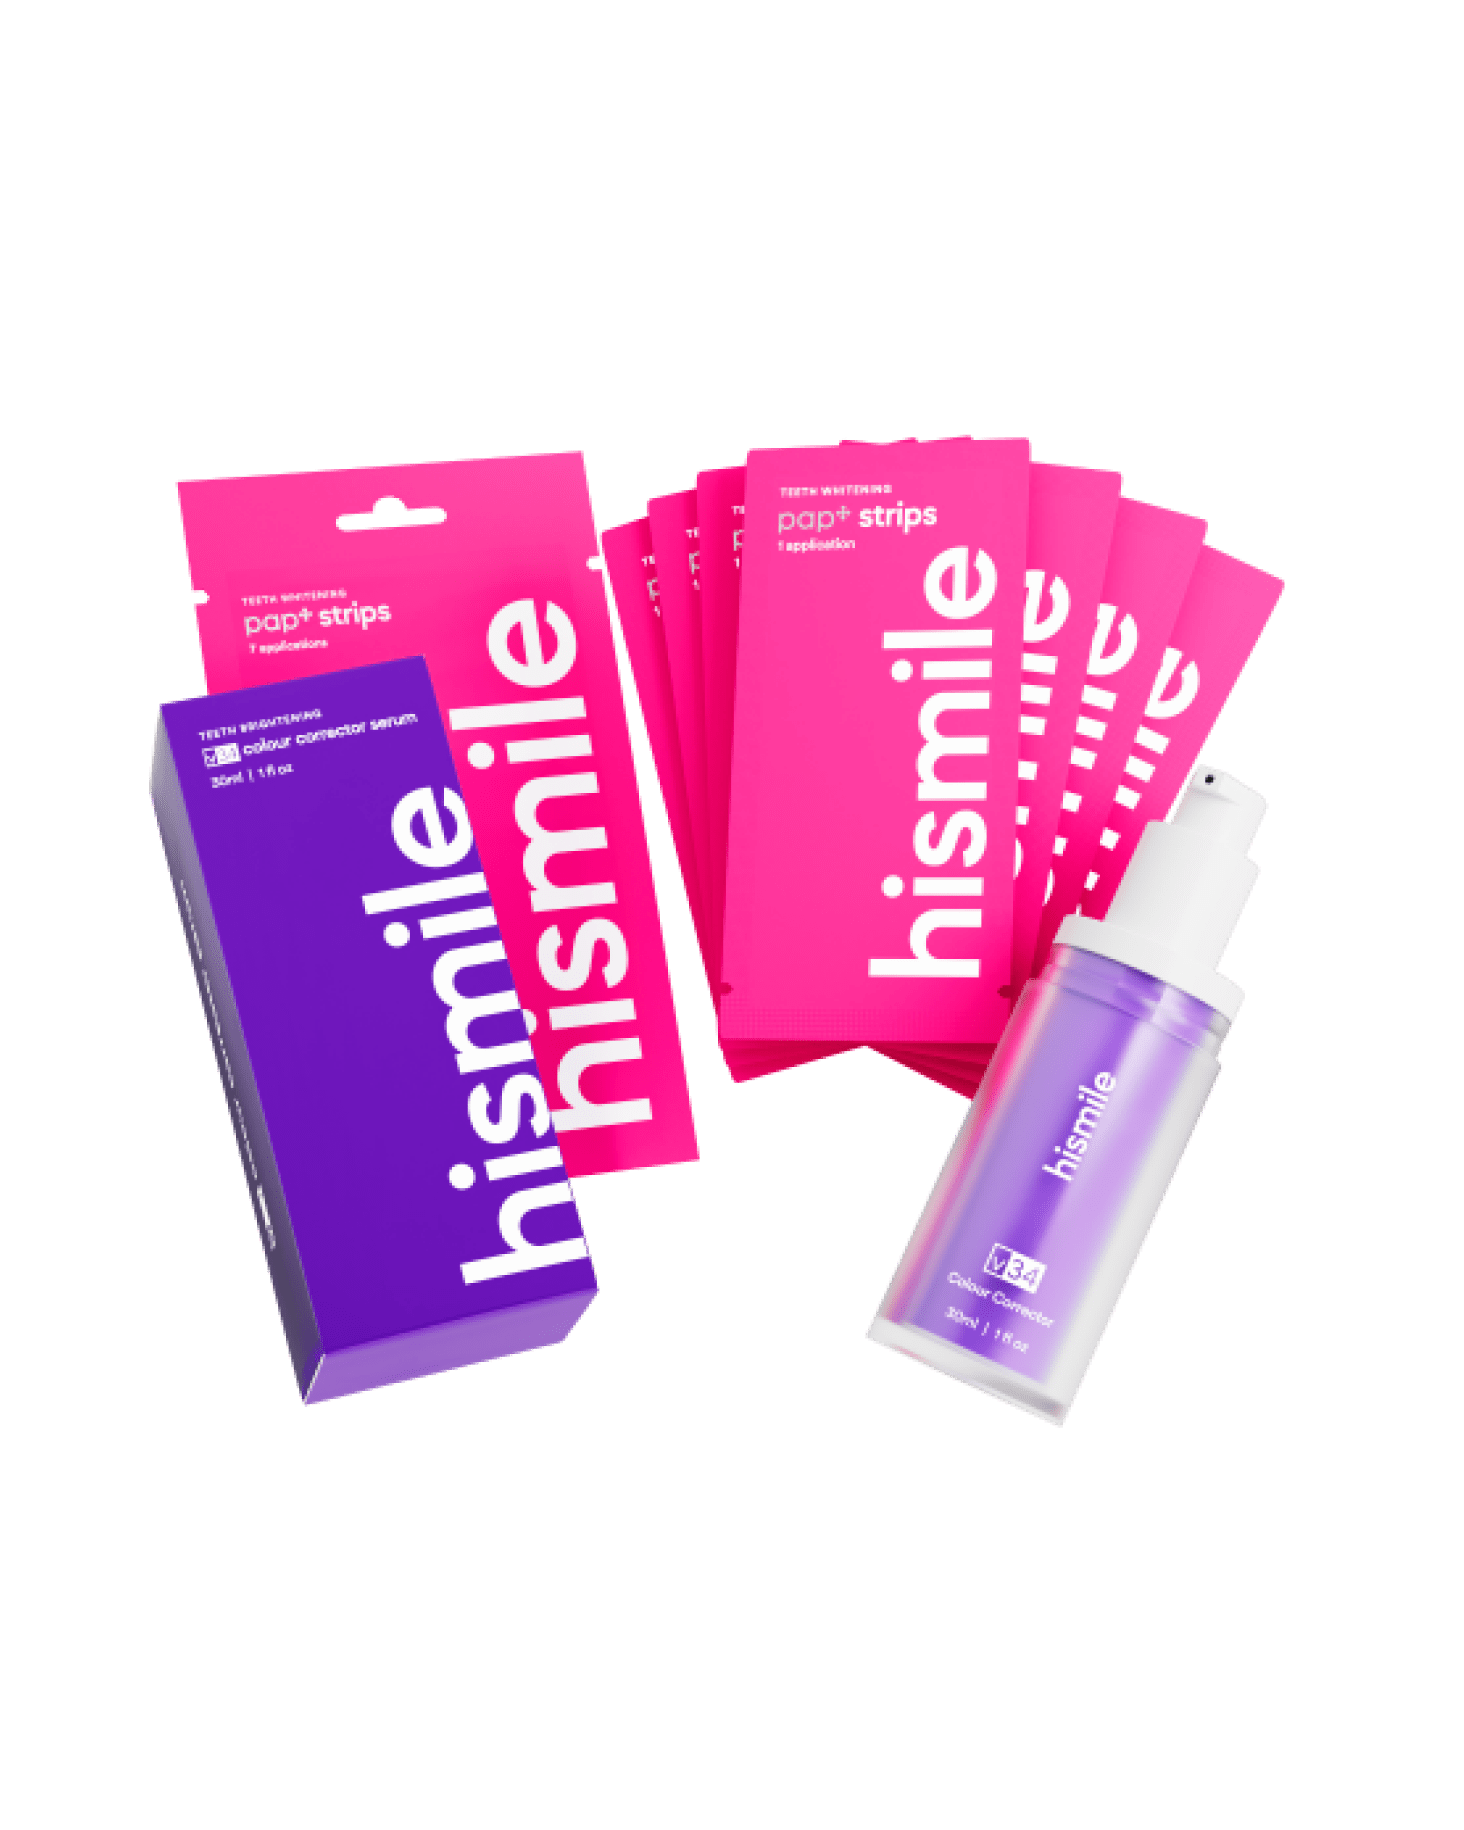 Hi Smile Products - Safe and Instant Whitening